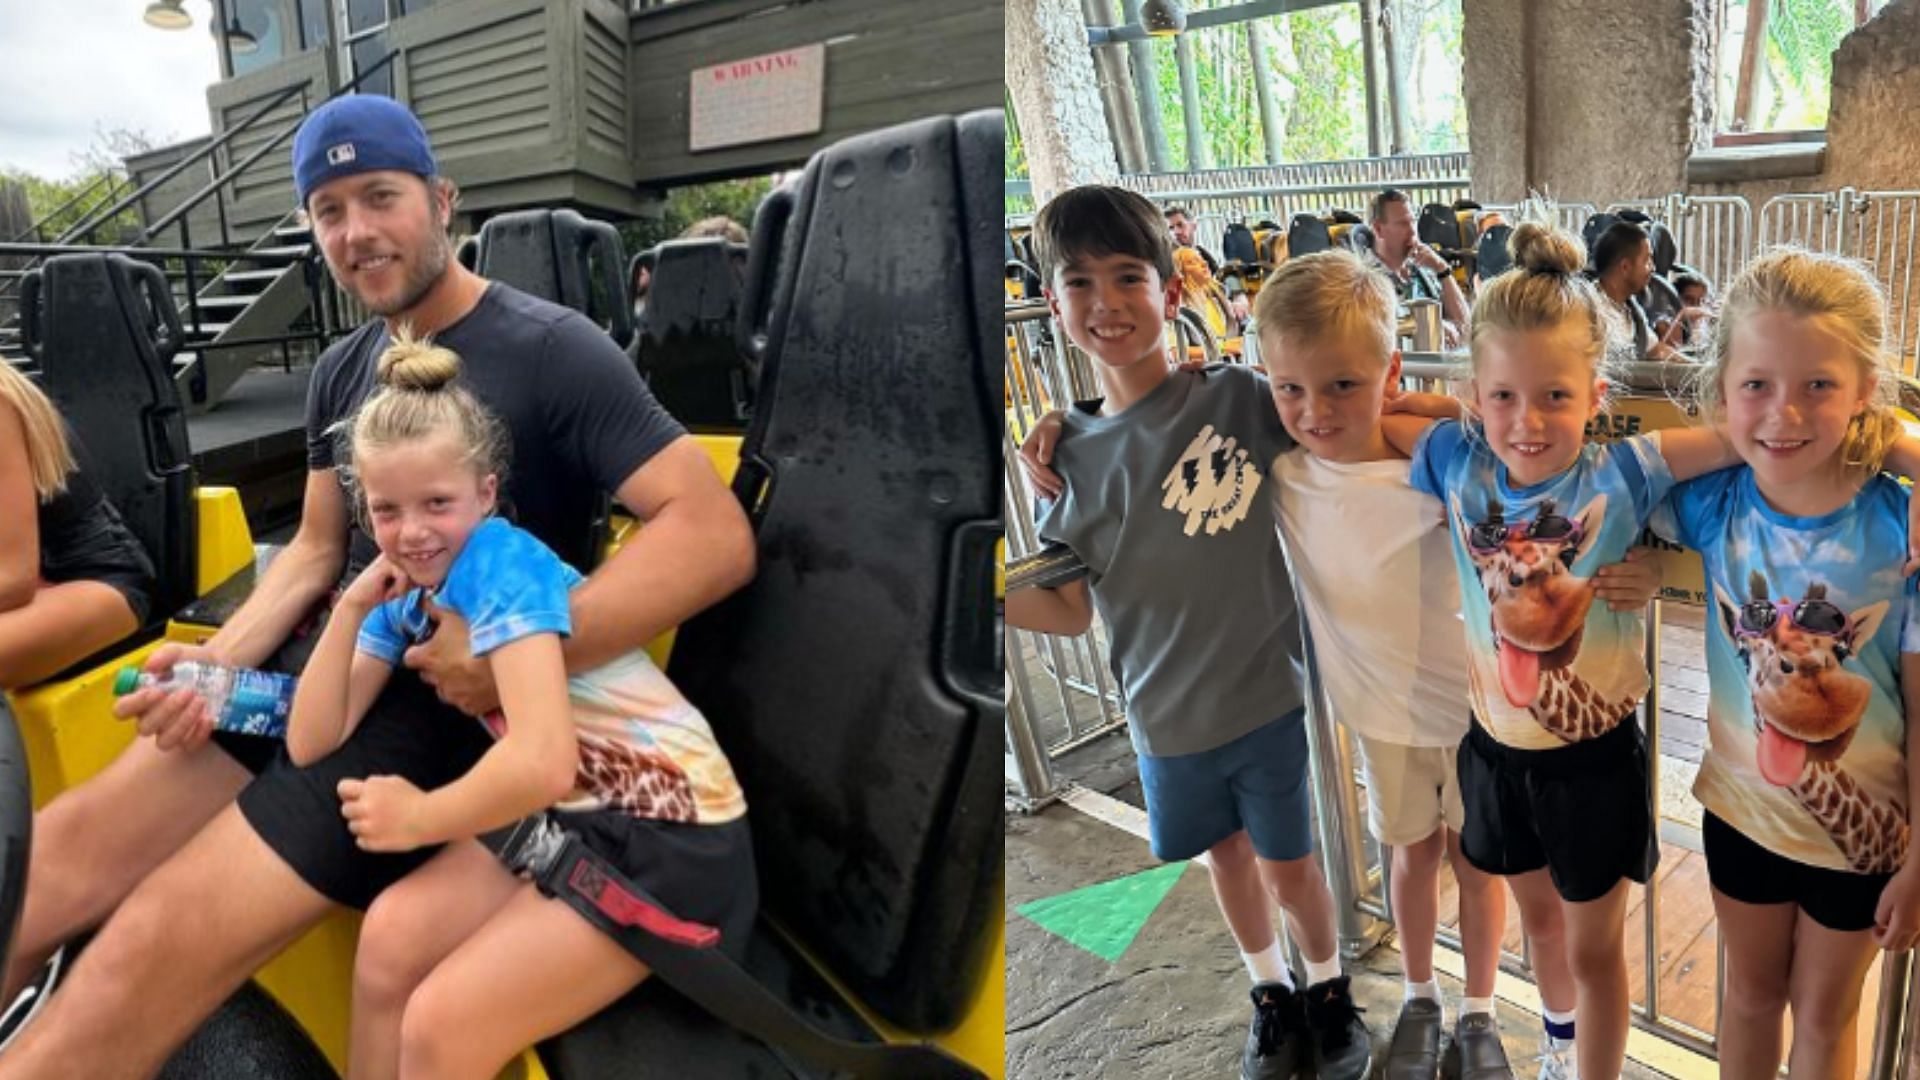 Matthew Stafford and his family enjoying time at Busch Gardens.